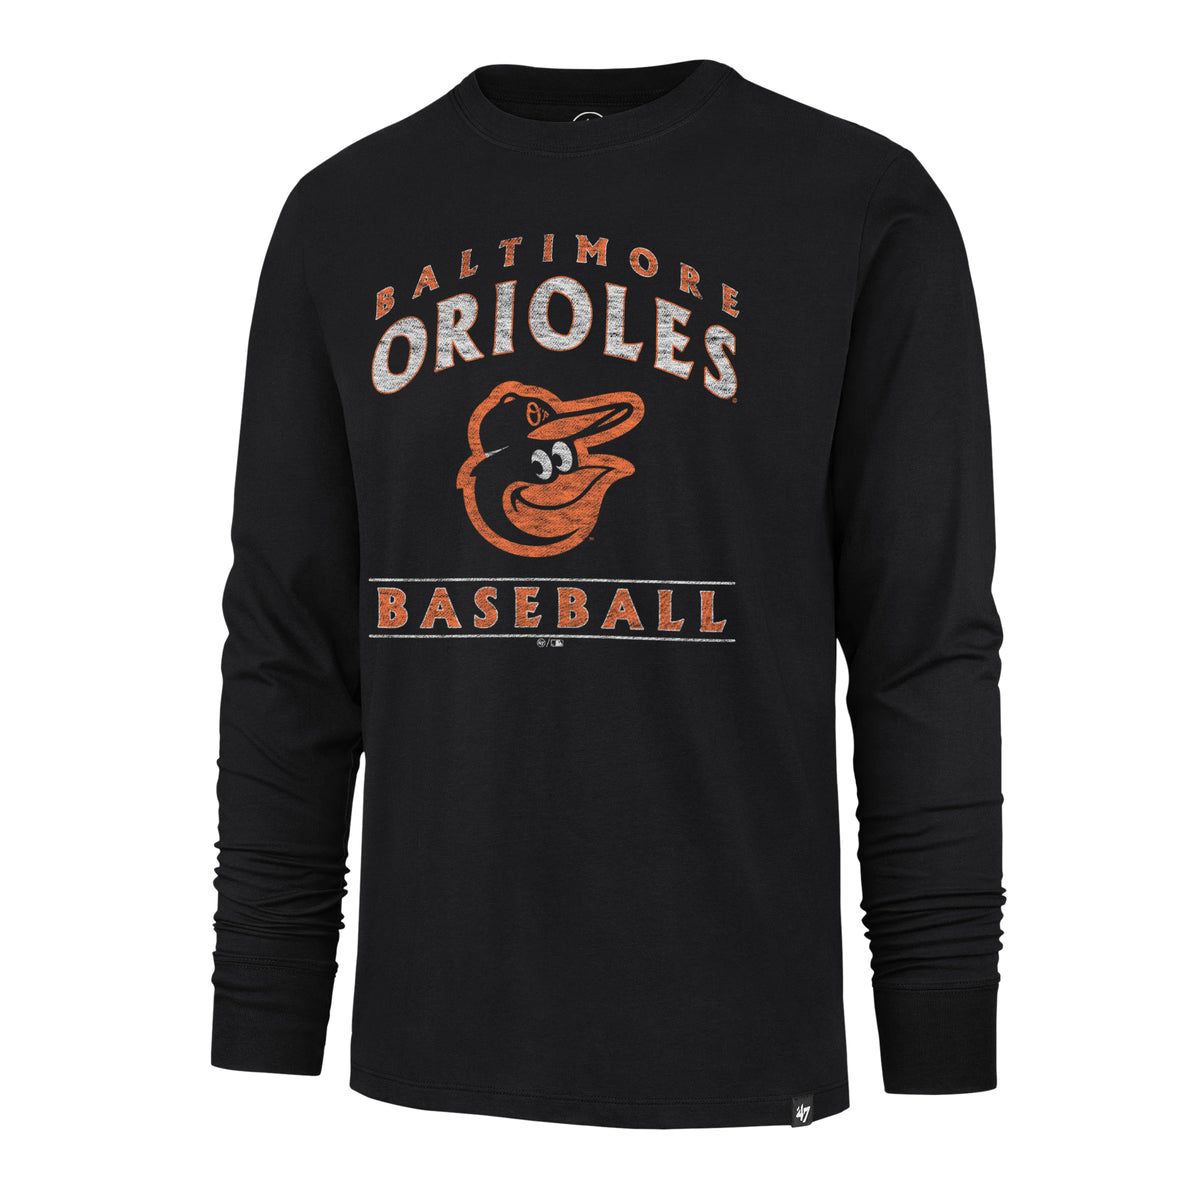 BALTIMORE ORIOLES DISSIPATE '47 FRANKLIN LONG SLEEVE